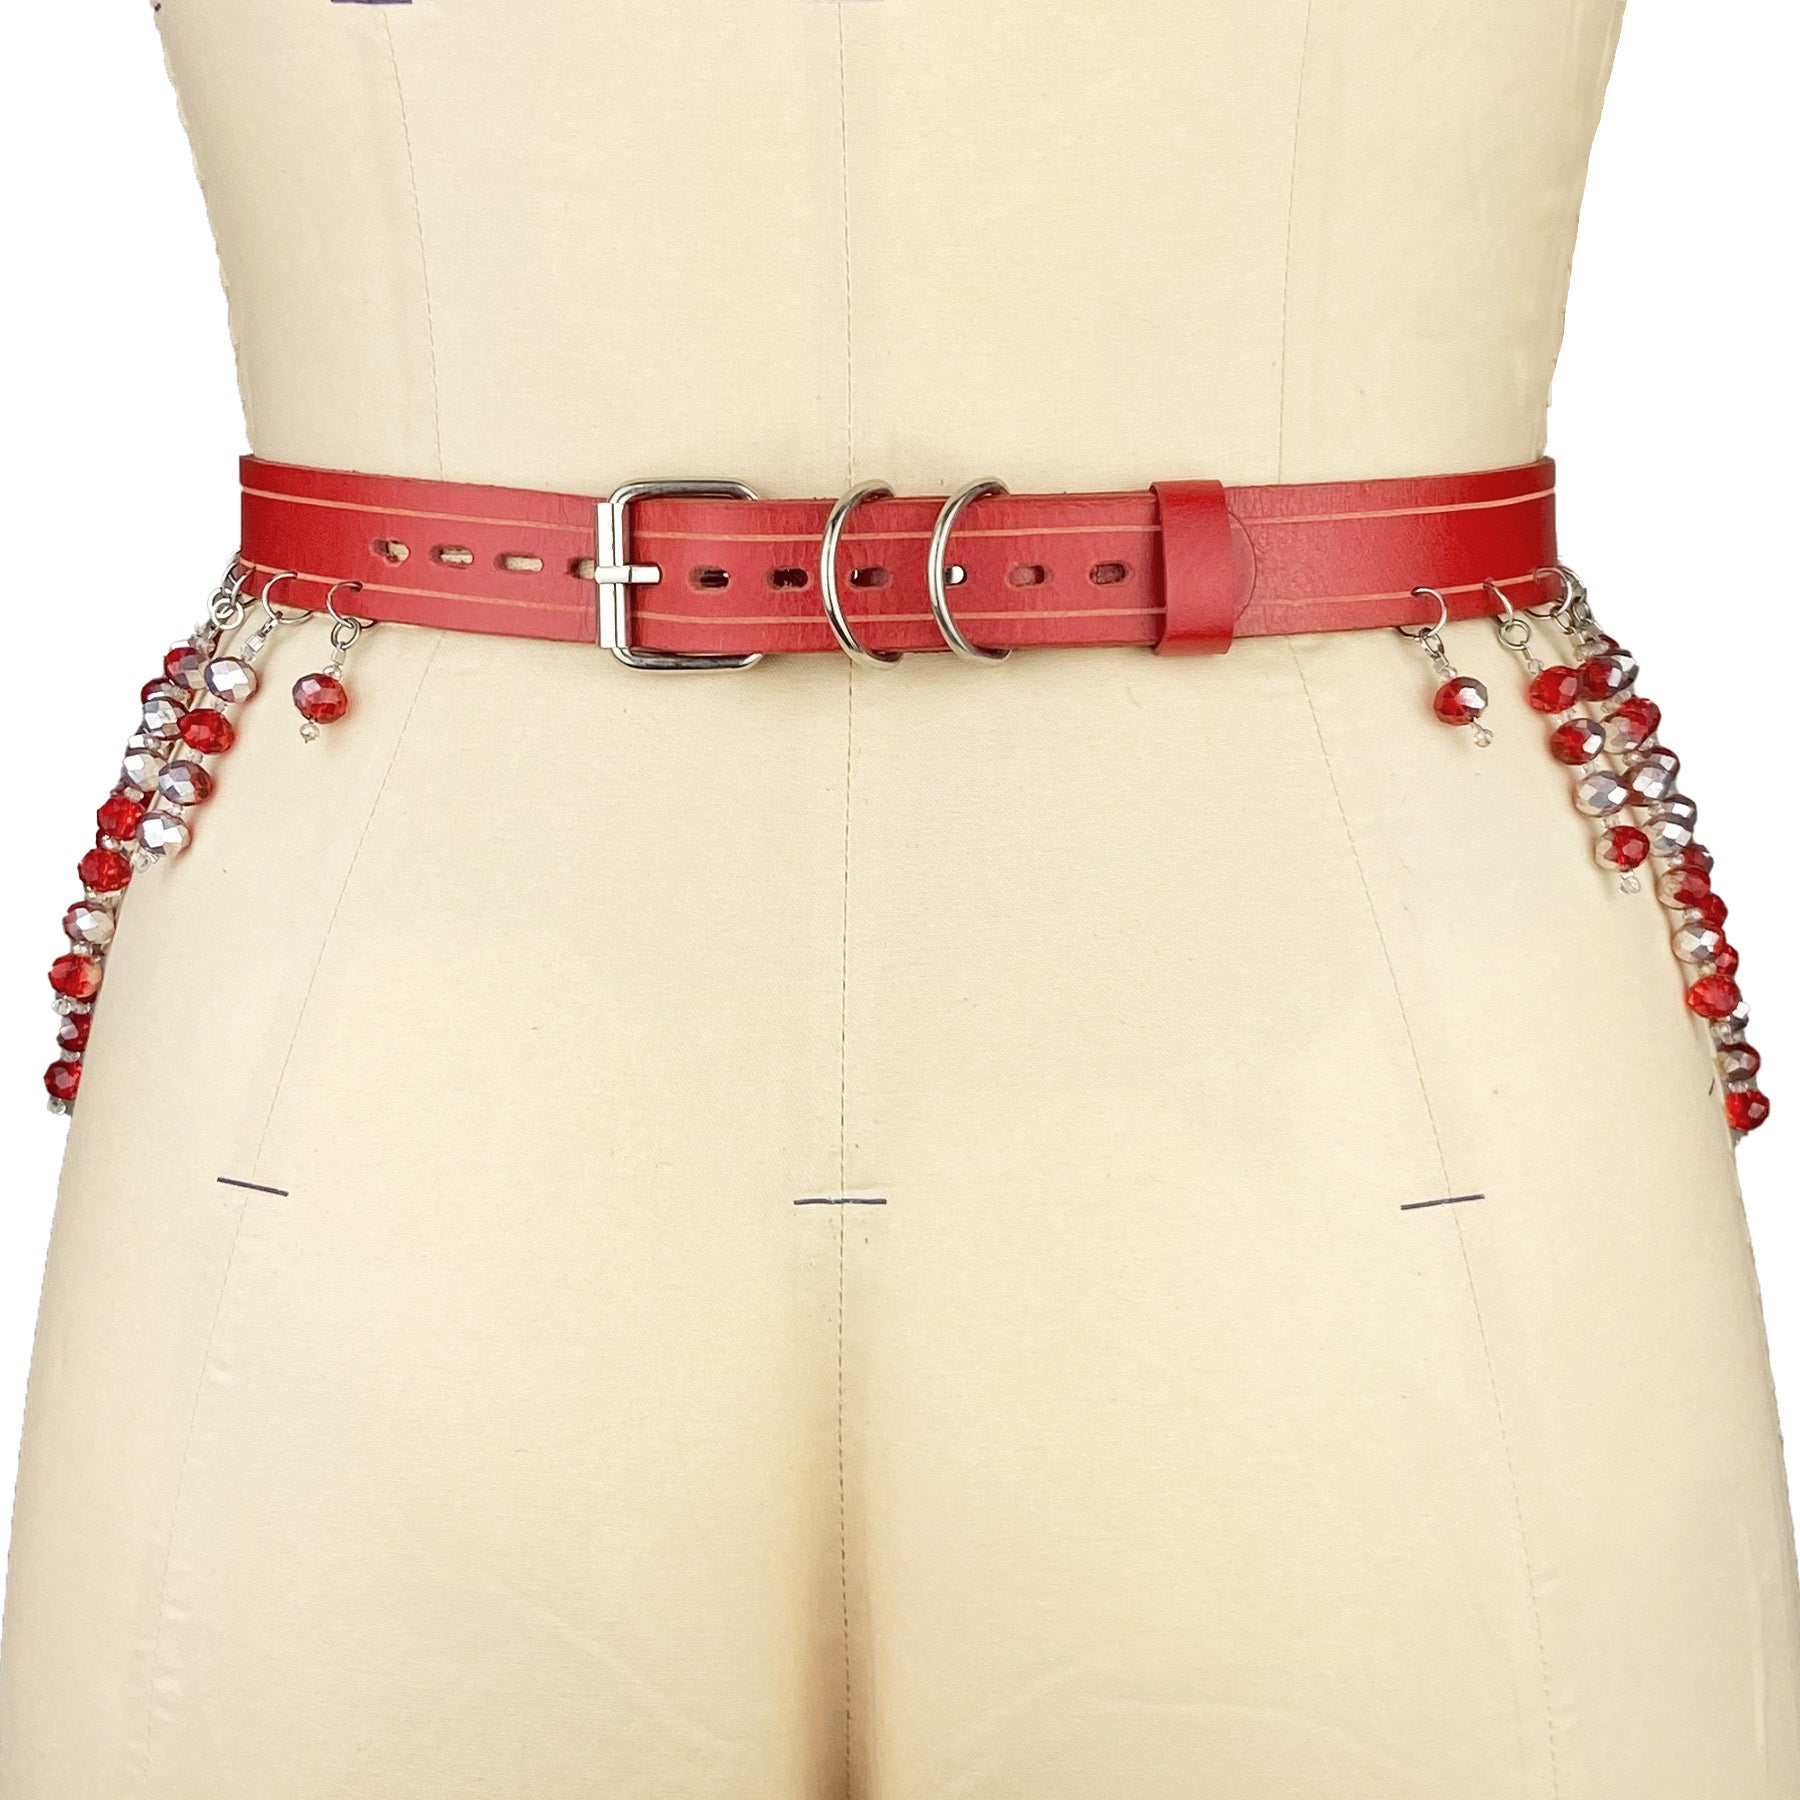 red italian leather luxury belt, sample sale, vintage beads, hand etched, leather work, bryona ashly, burlesque costume back view